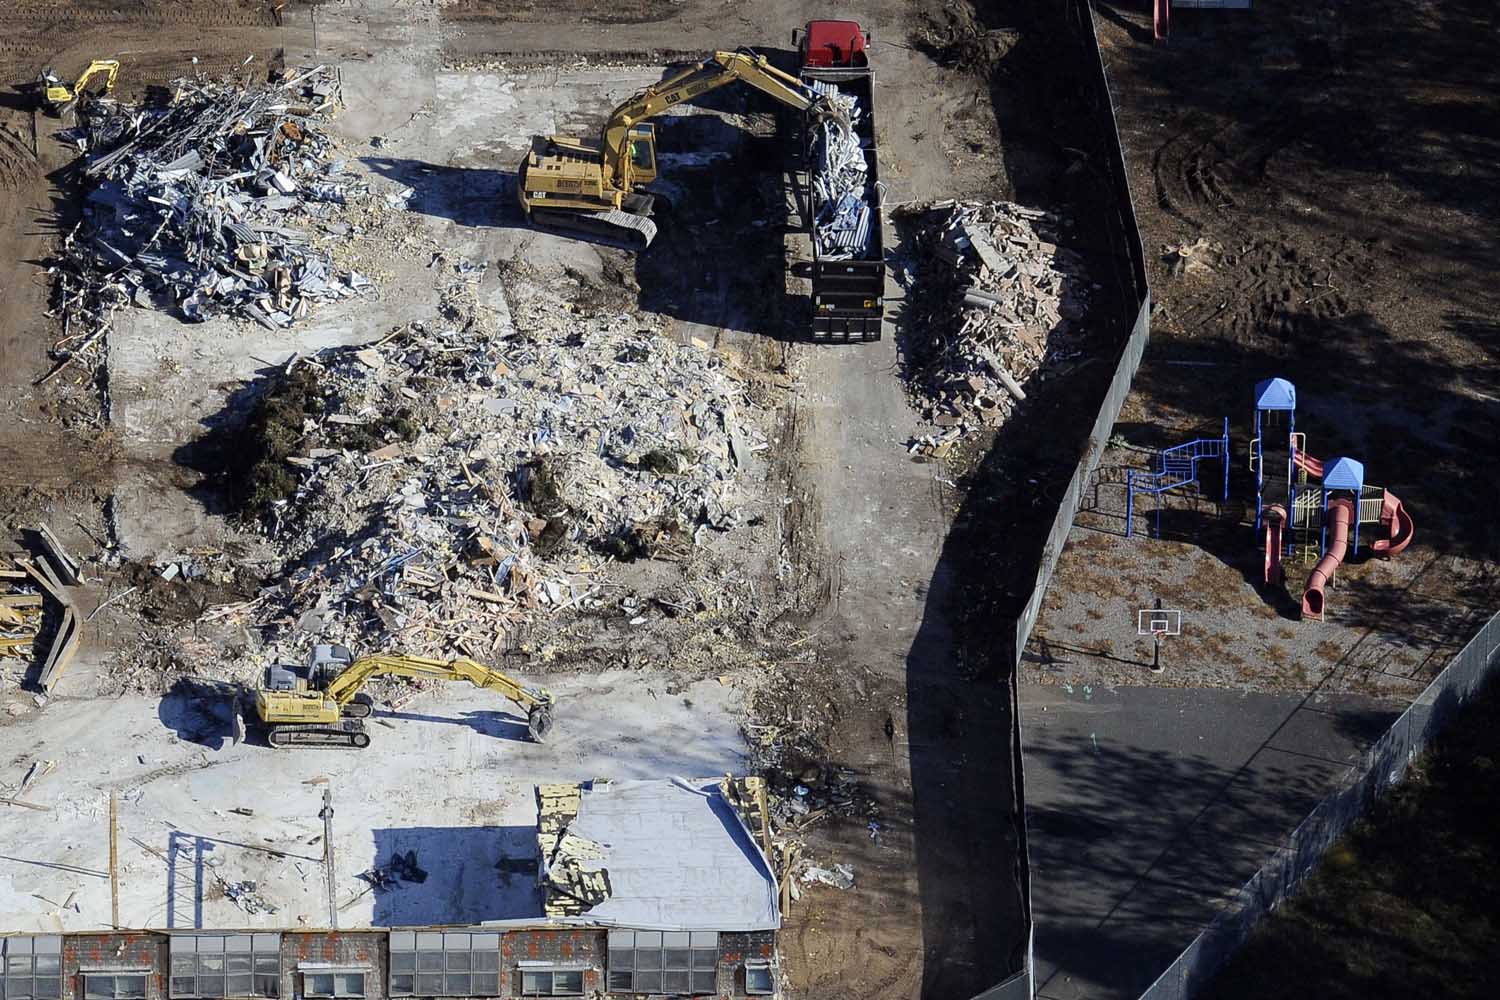 Oct. 28, 2013. Workers use backhoes to dig through the rubble as the demolition of Sandy Hook Elementary School continues in Newtown, Conn.